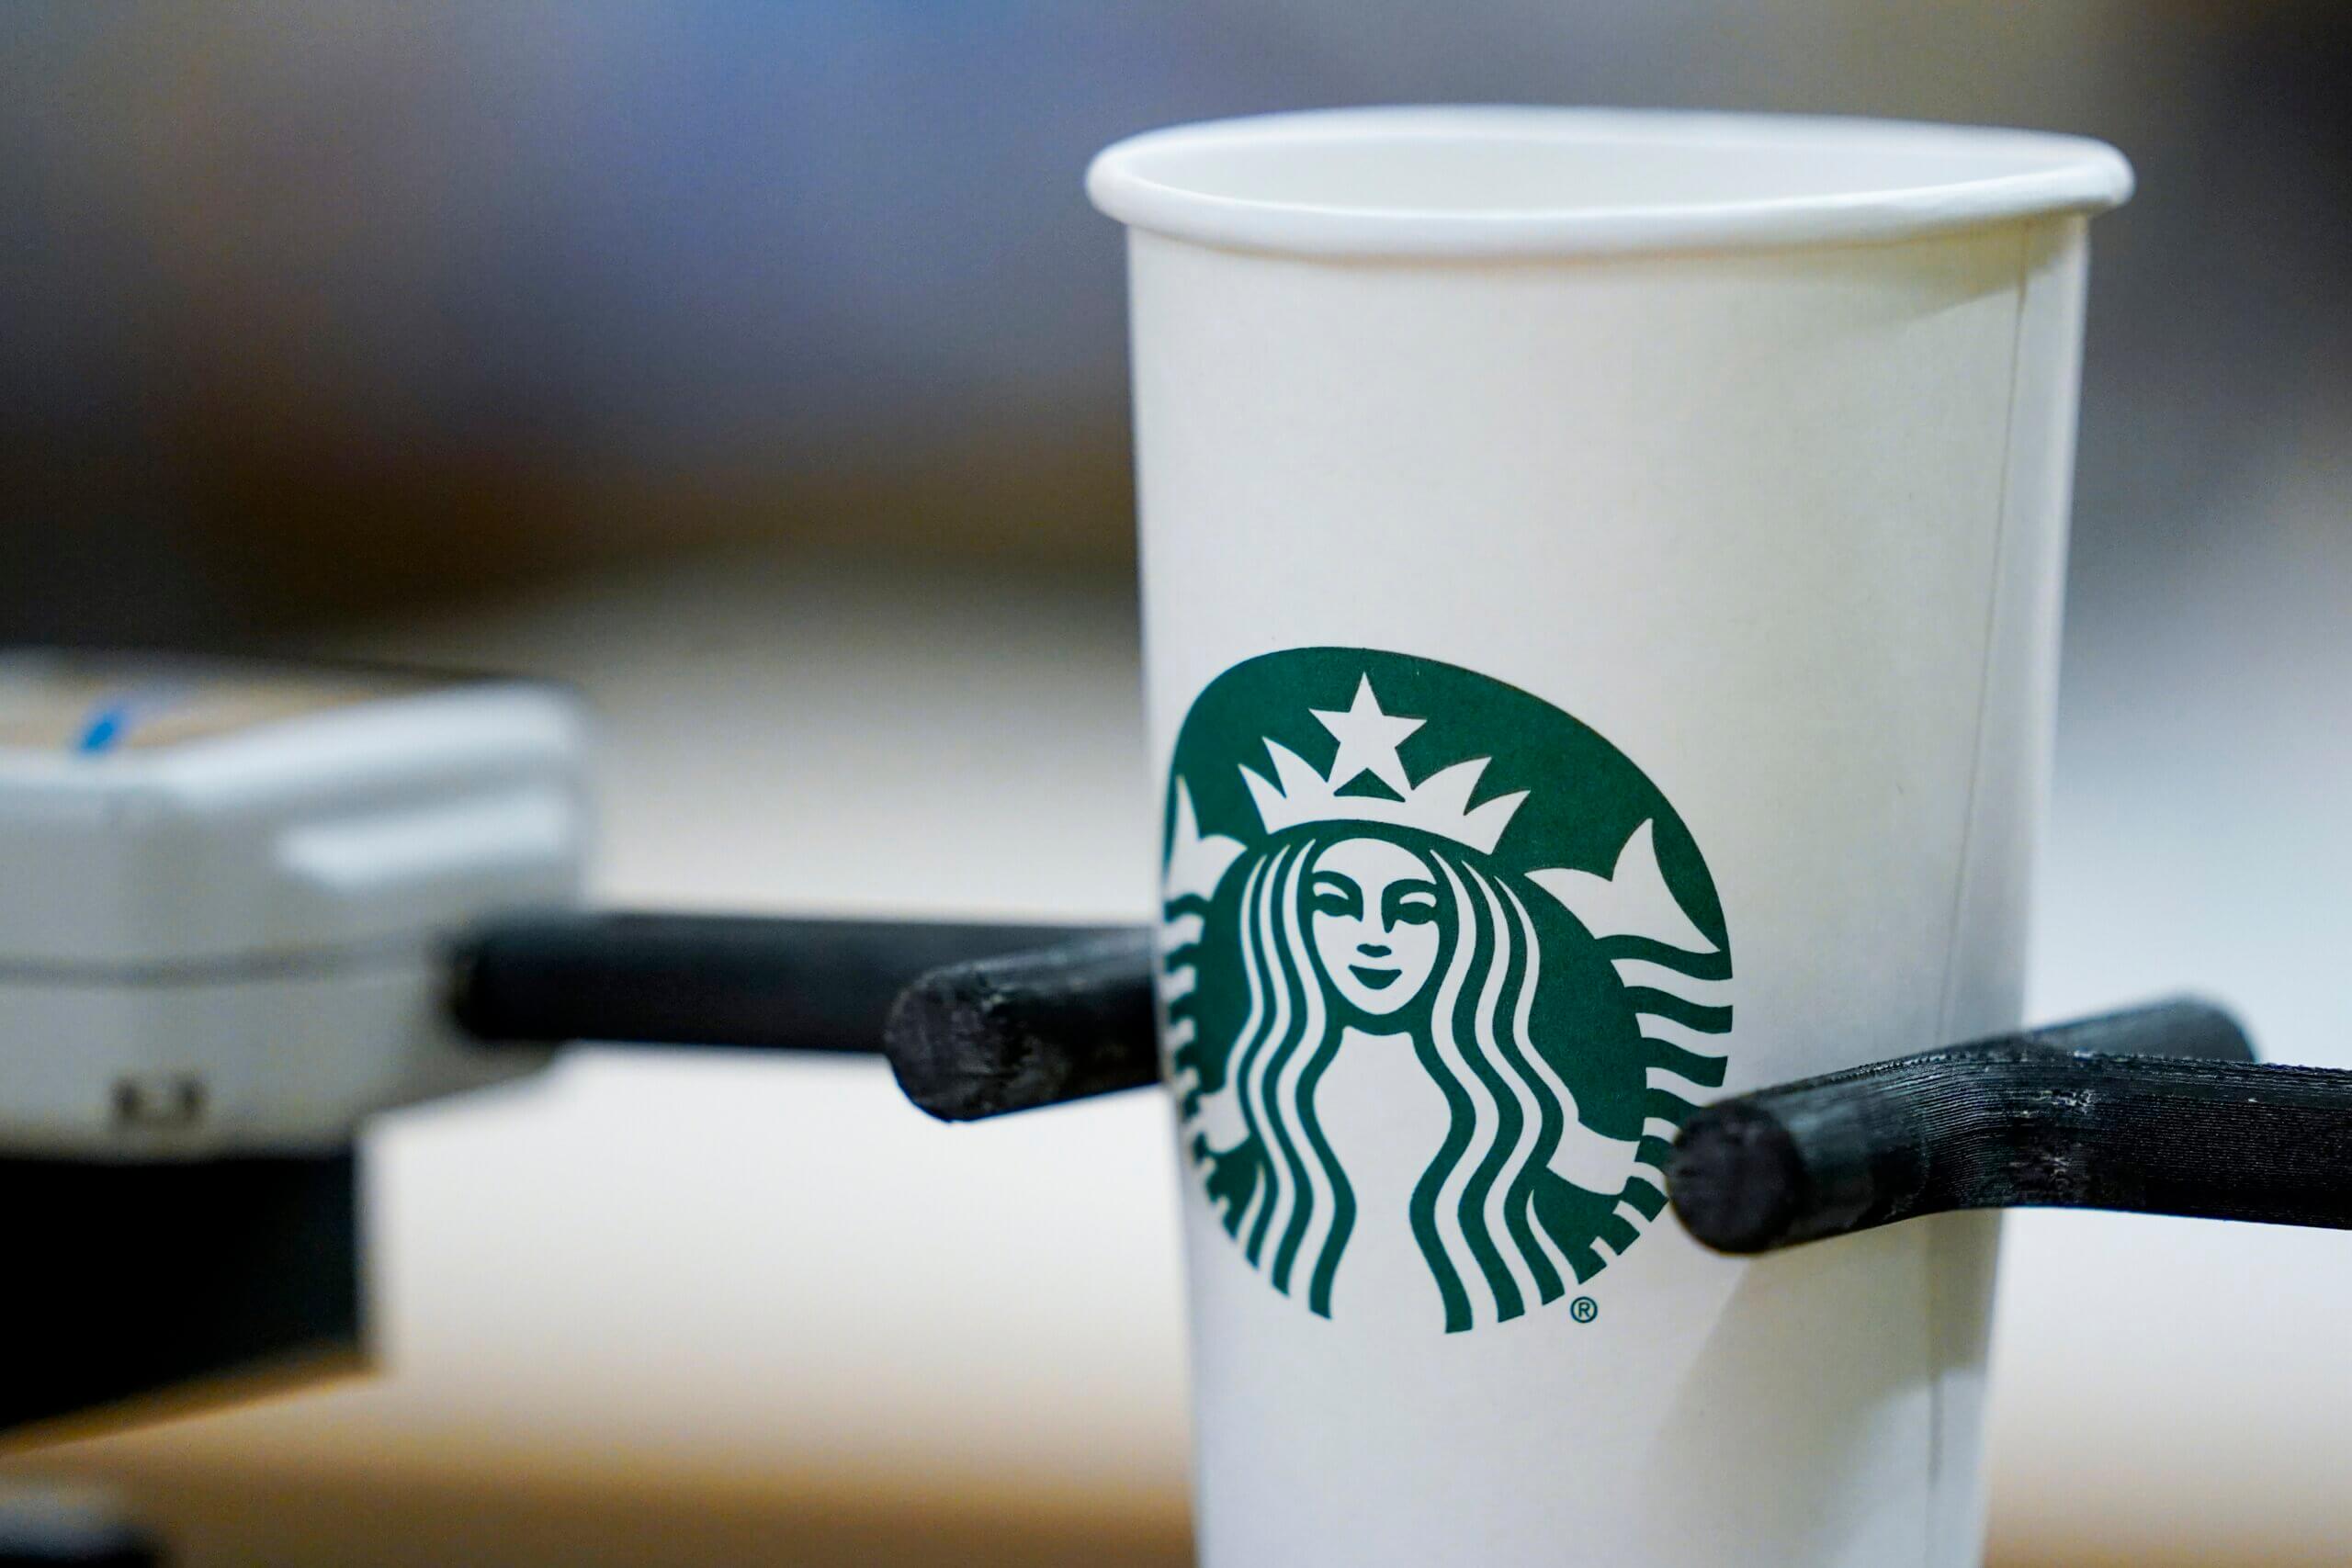 Are Starbucks Reusable Cups Worth It? The Pros and Cons